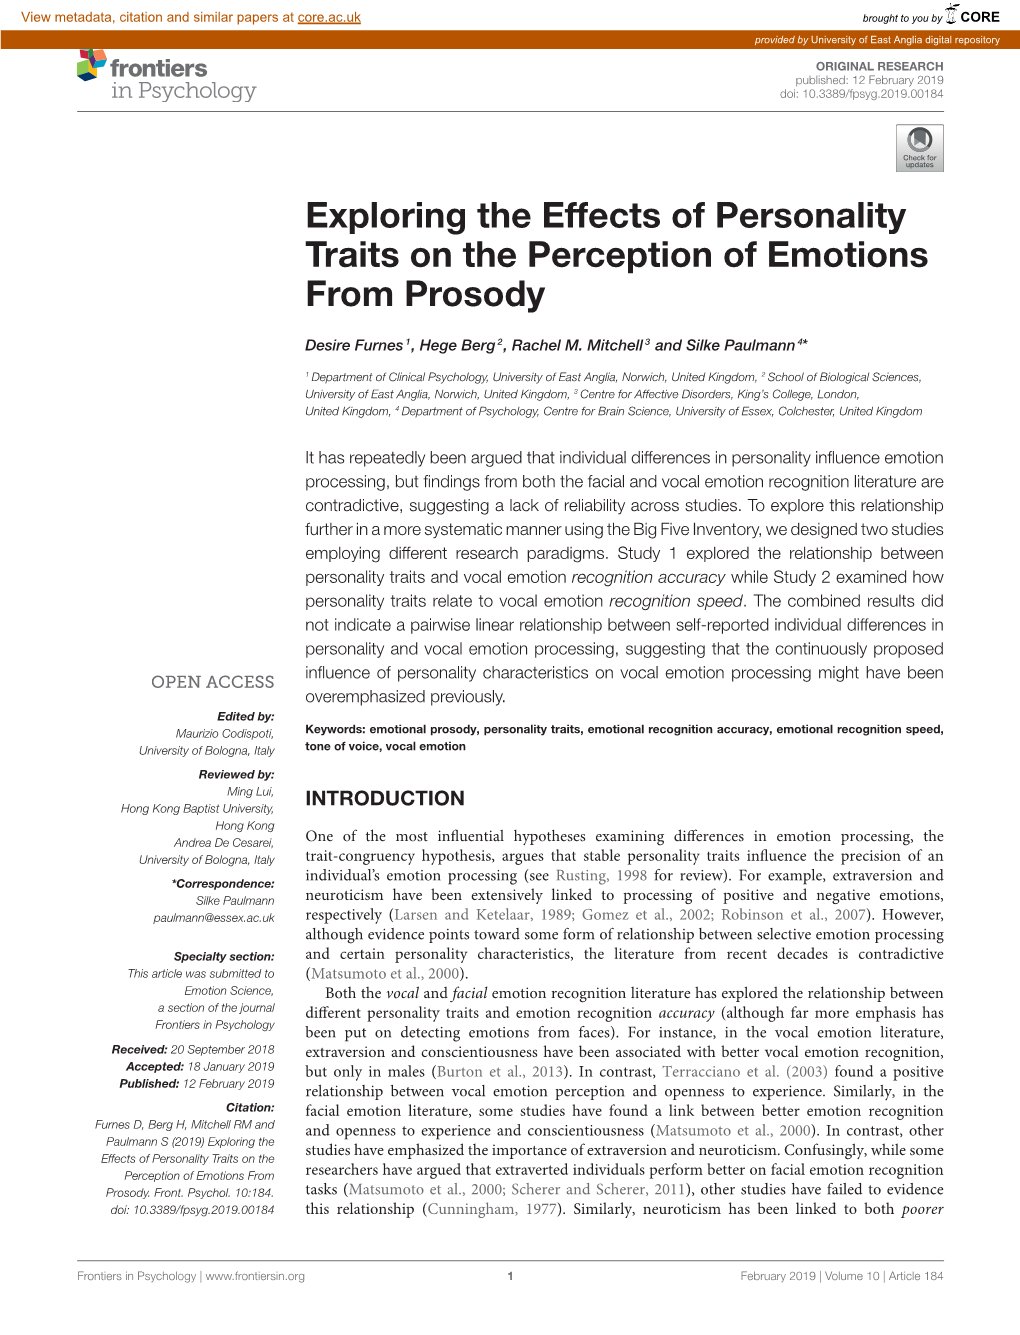 Exploring the Effects of Personality Traits on the Perception of Emotions from Prosody